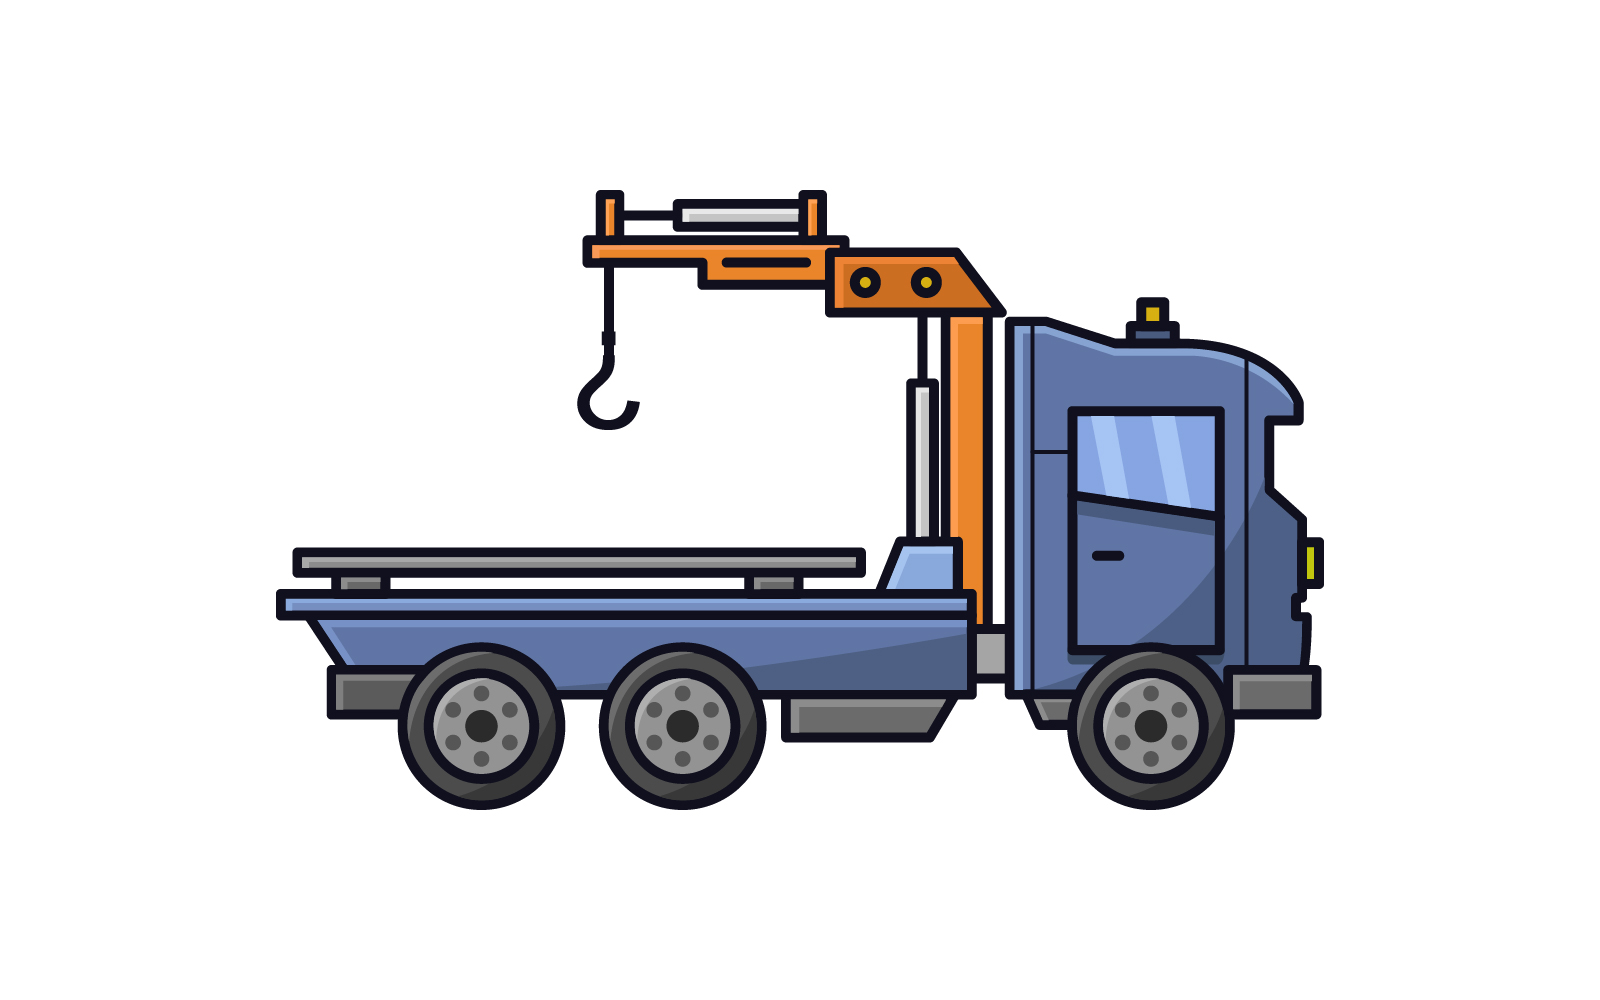 Tow truck illustrated in vector on background